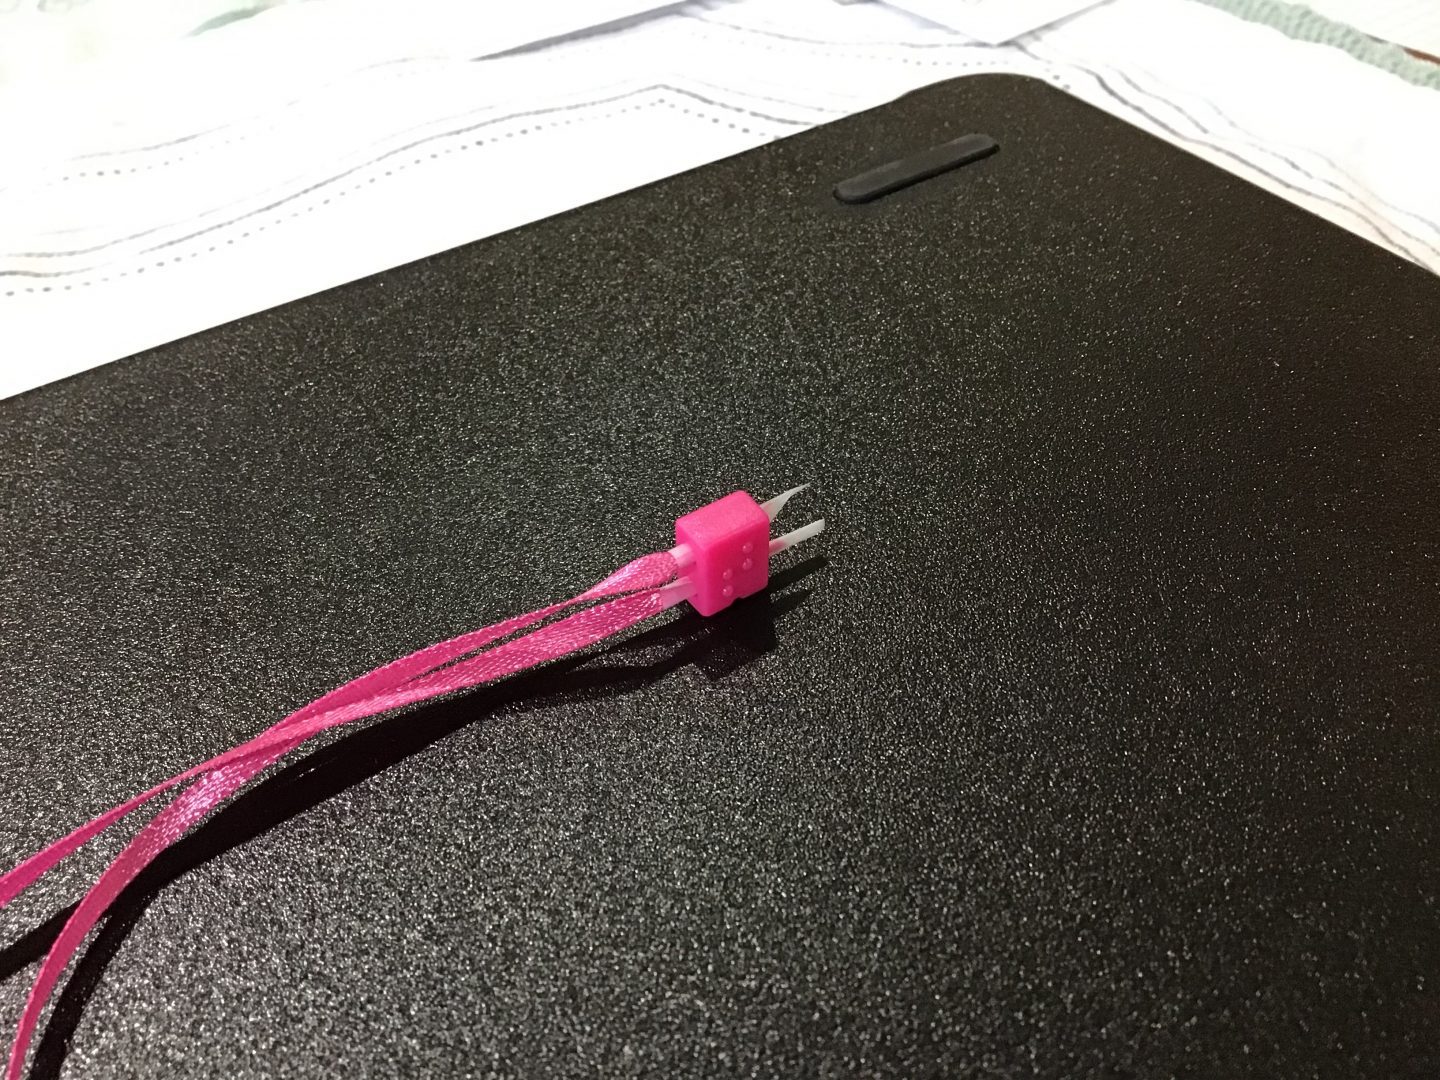 the two ends of th pink ribbon tightly wrapped in tape to make the ends rigid being inserted through the holes in a braille bead